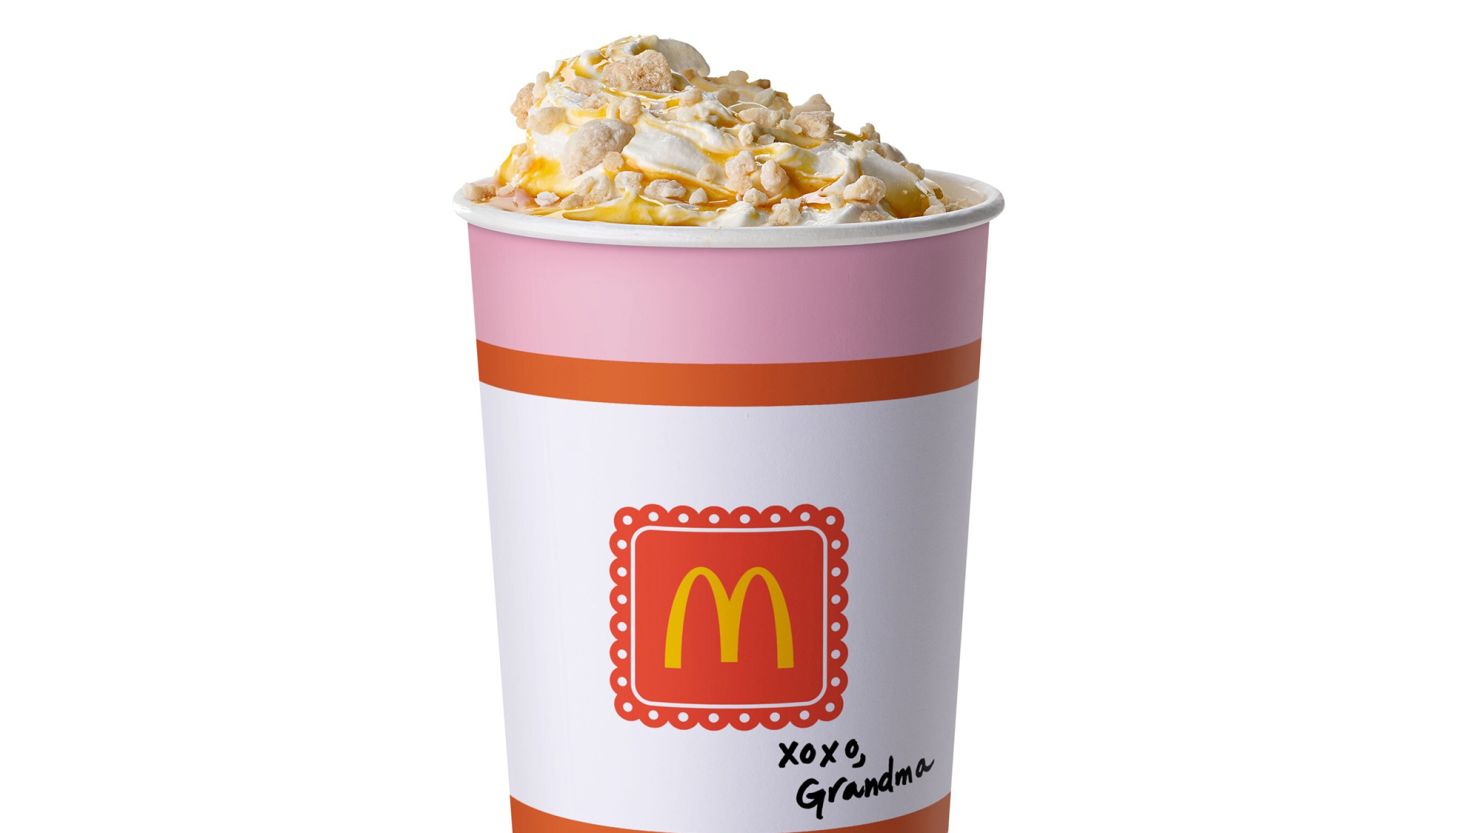 McDonald's is introducing a limited-edition Grandma McFlurry.